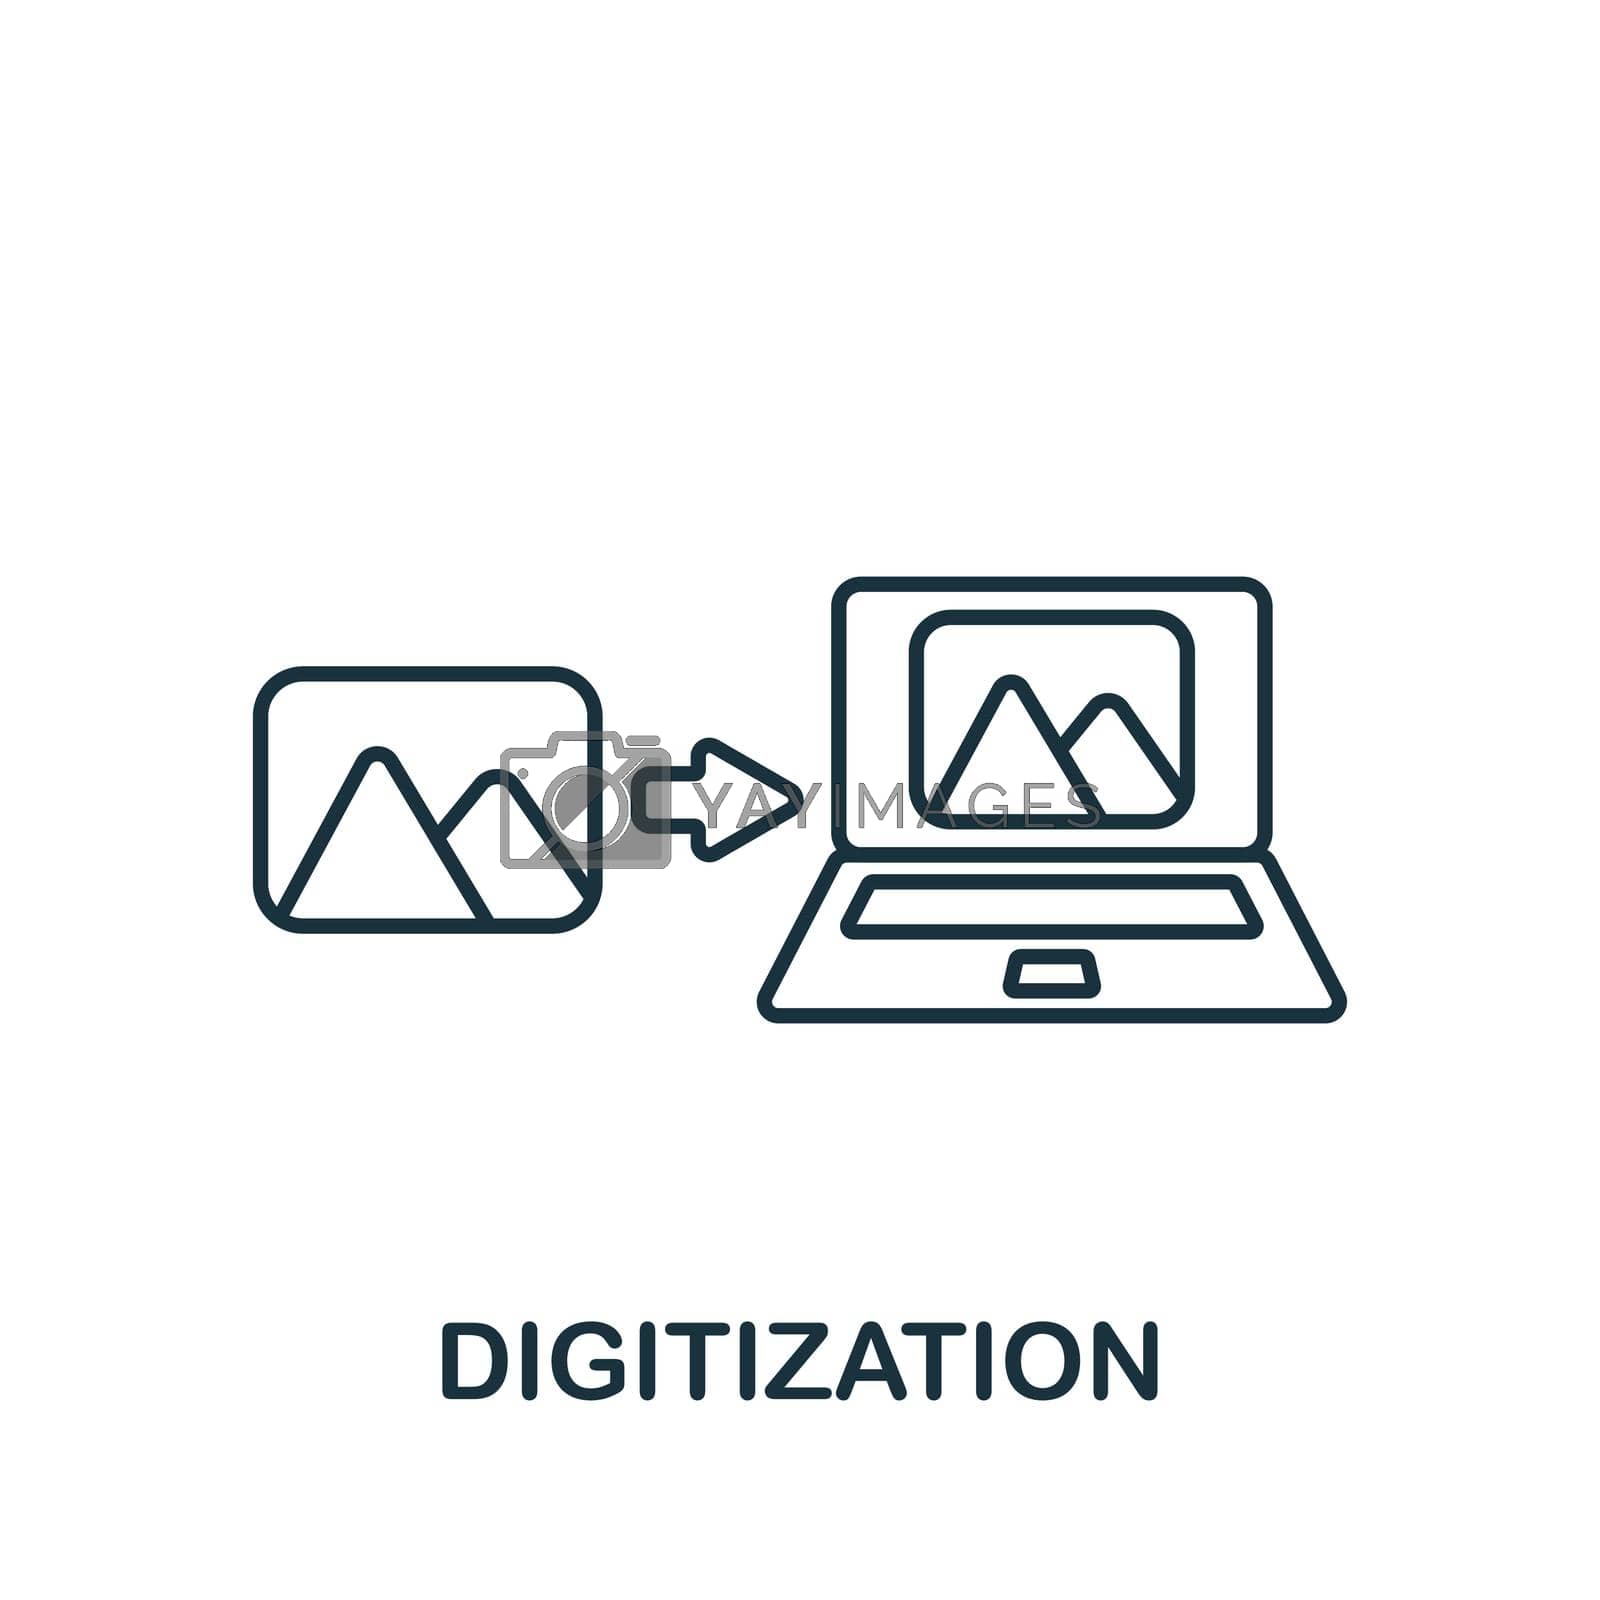 Royalty free image of Digitization icon. Line simple Industry 4.0 icon for templates, web design and infographics by simakovavector